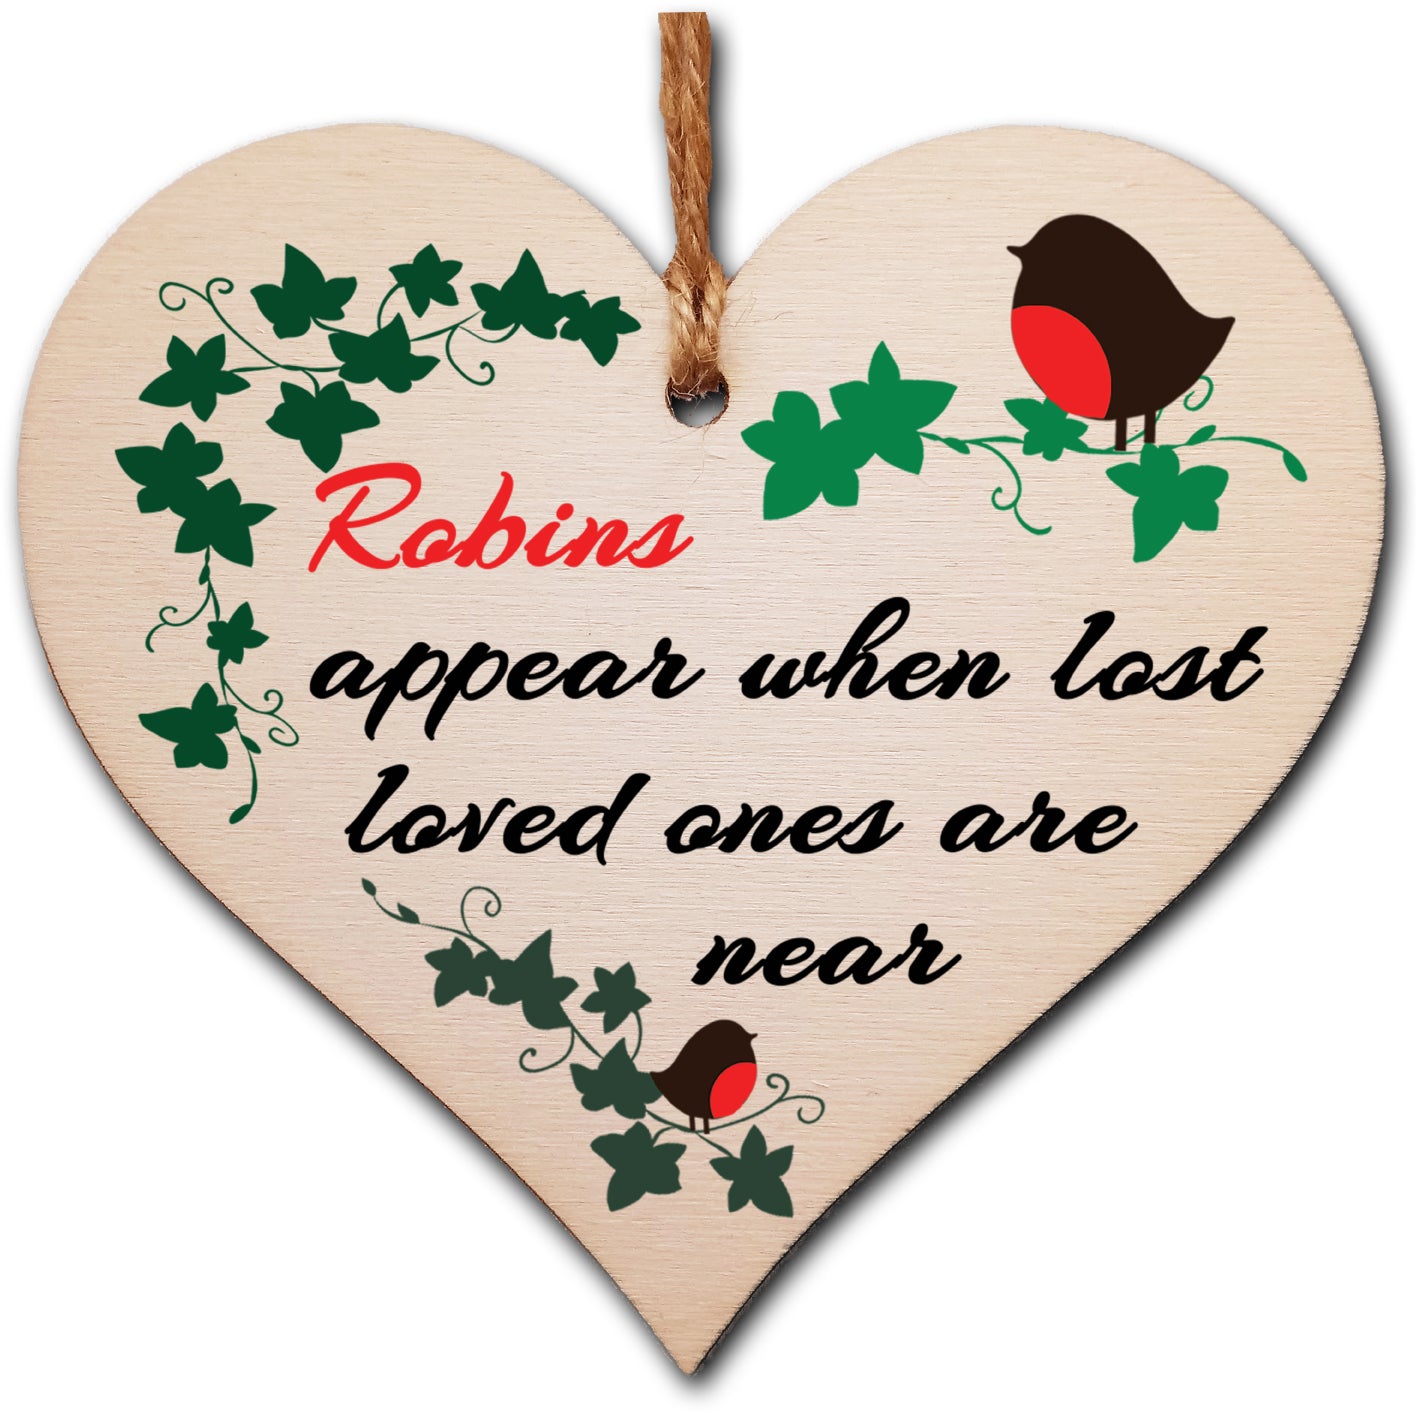 Handmade Wooden Hanging Heart Plaque Gift to Remember Lost Loved Ones